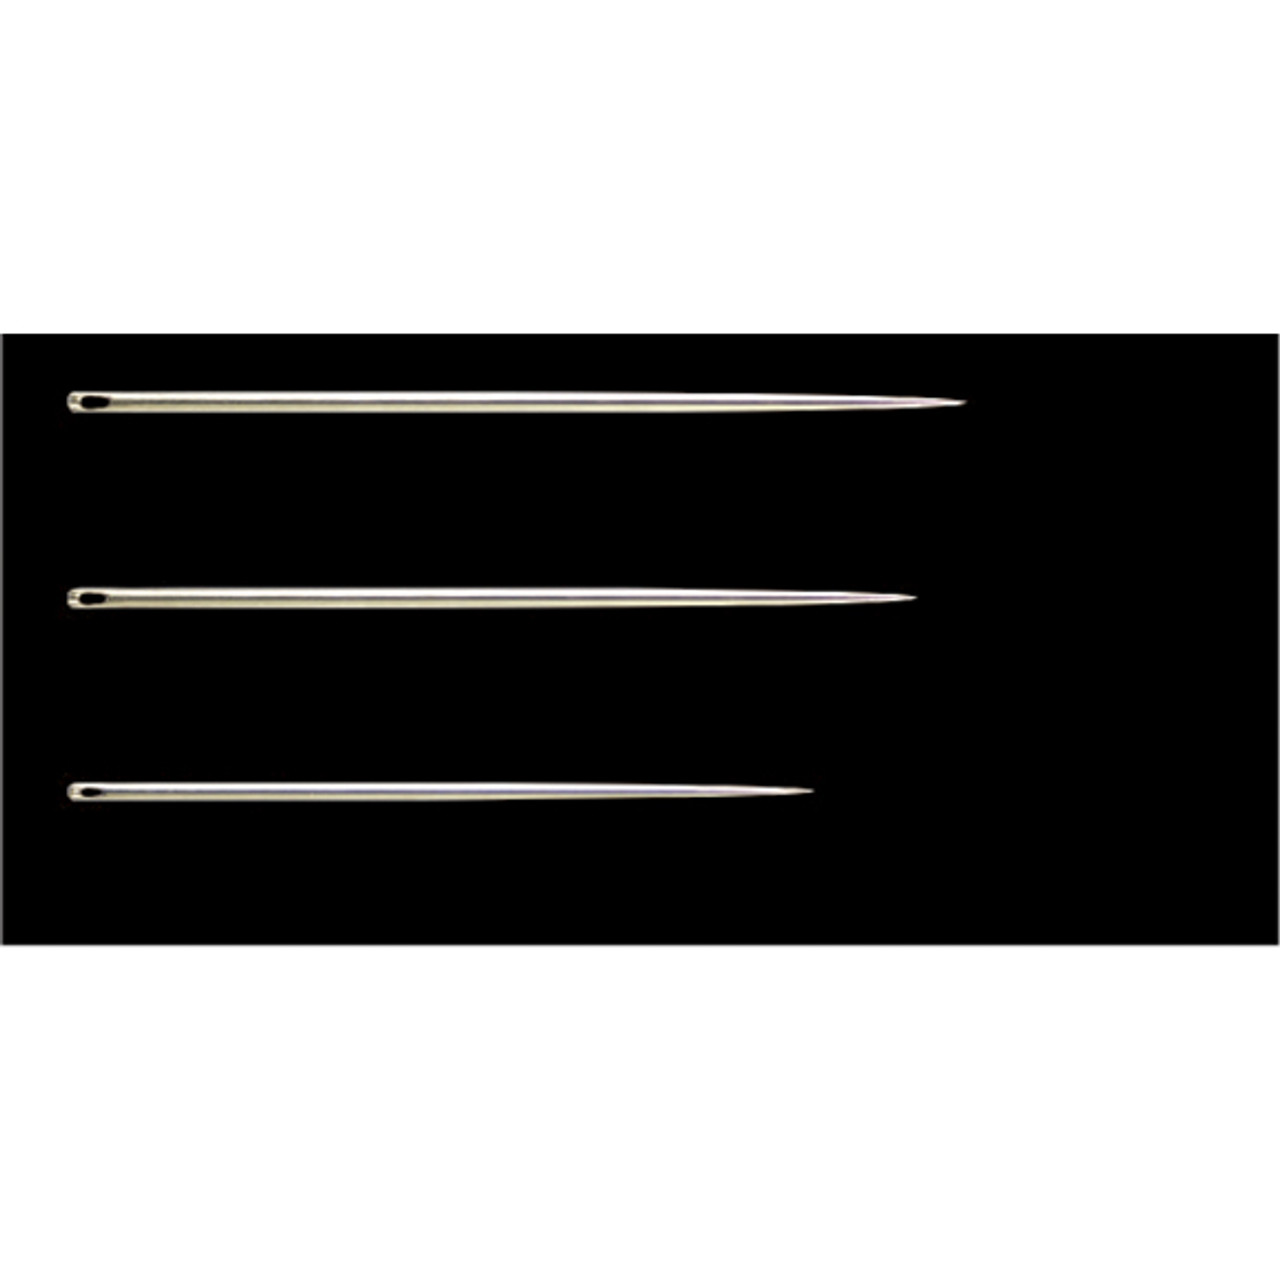 468/09
Quilting Needles(No. 9)
0.56 × 27.3 mm